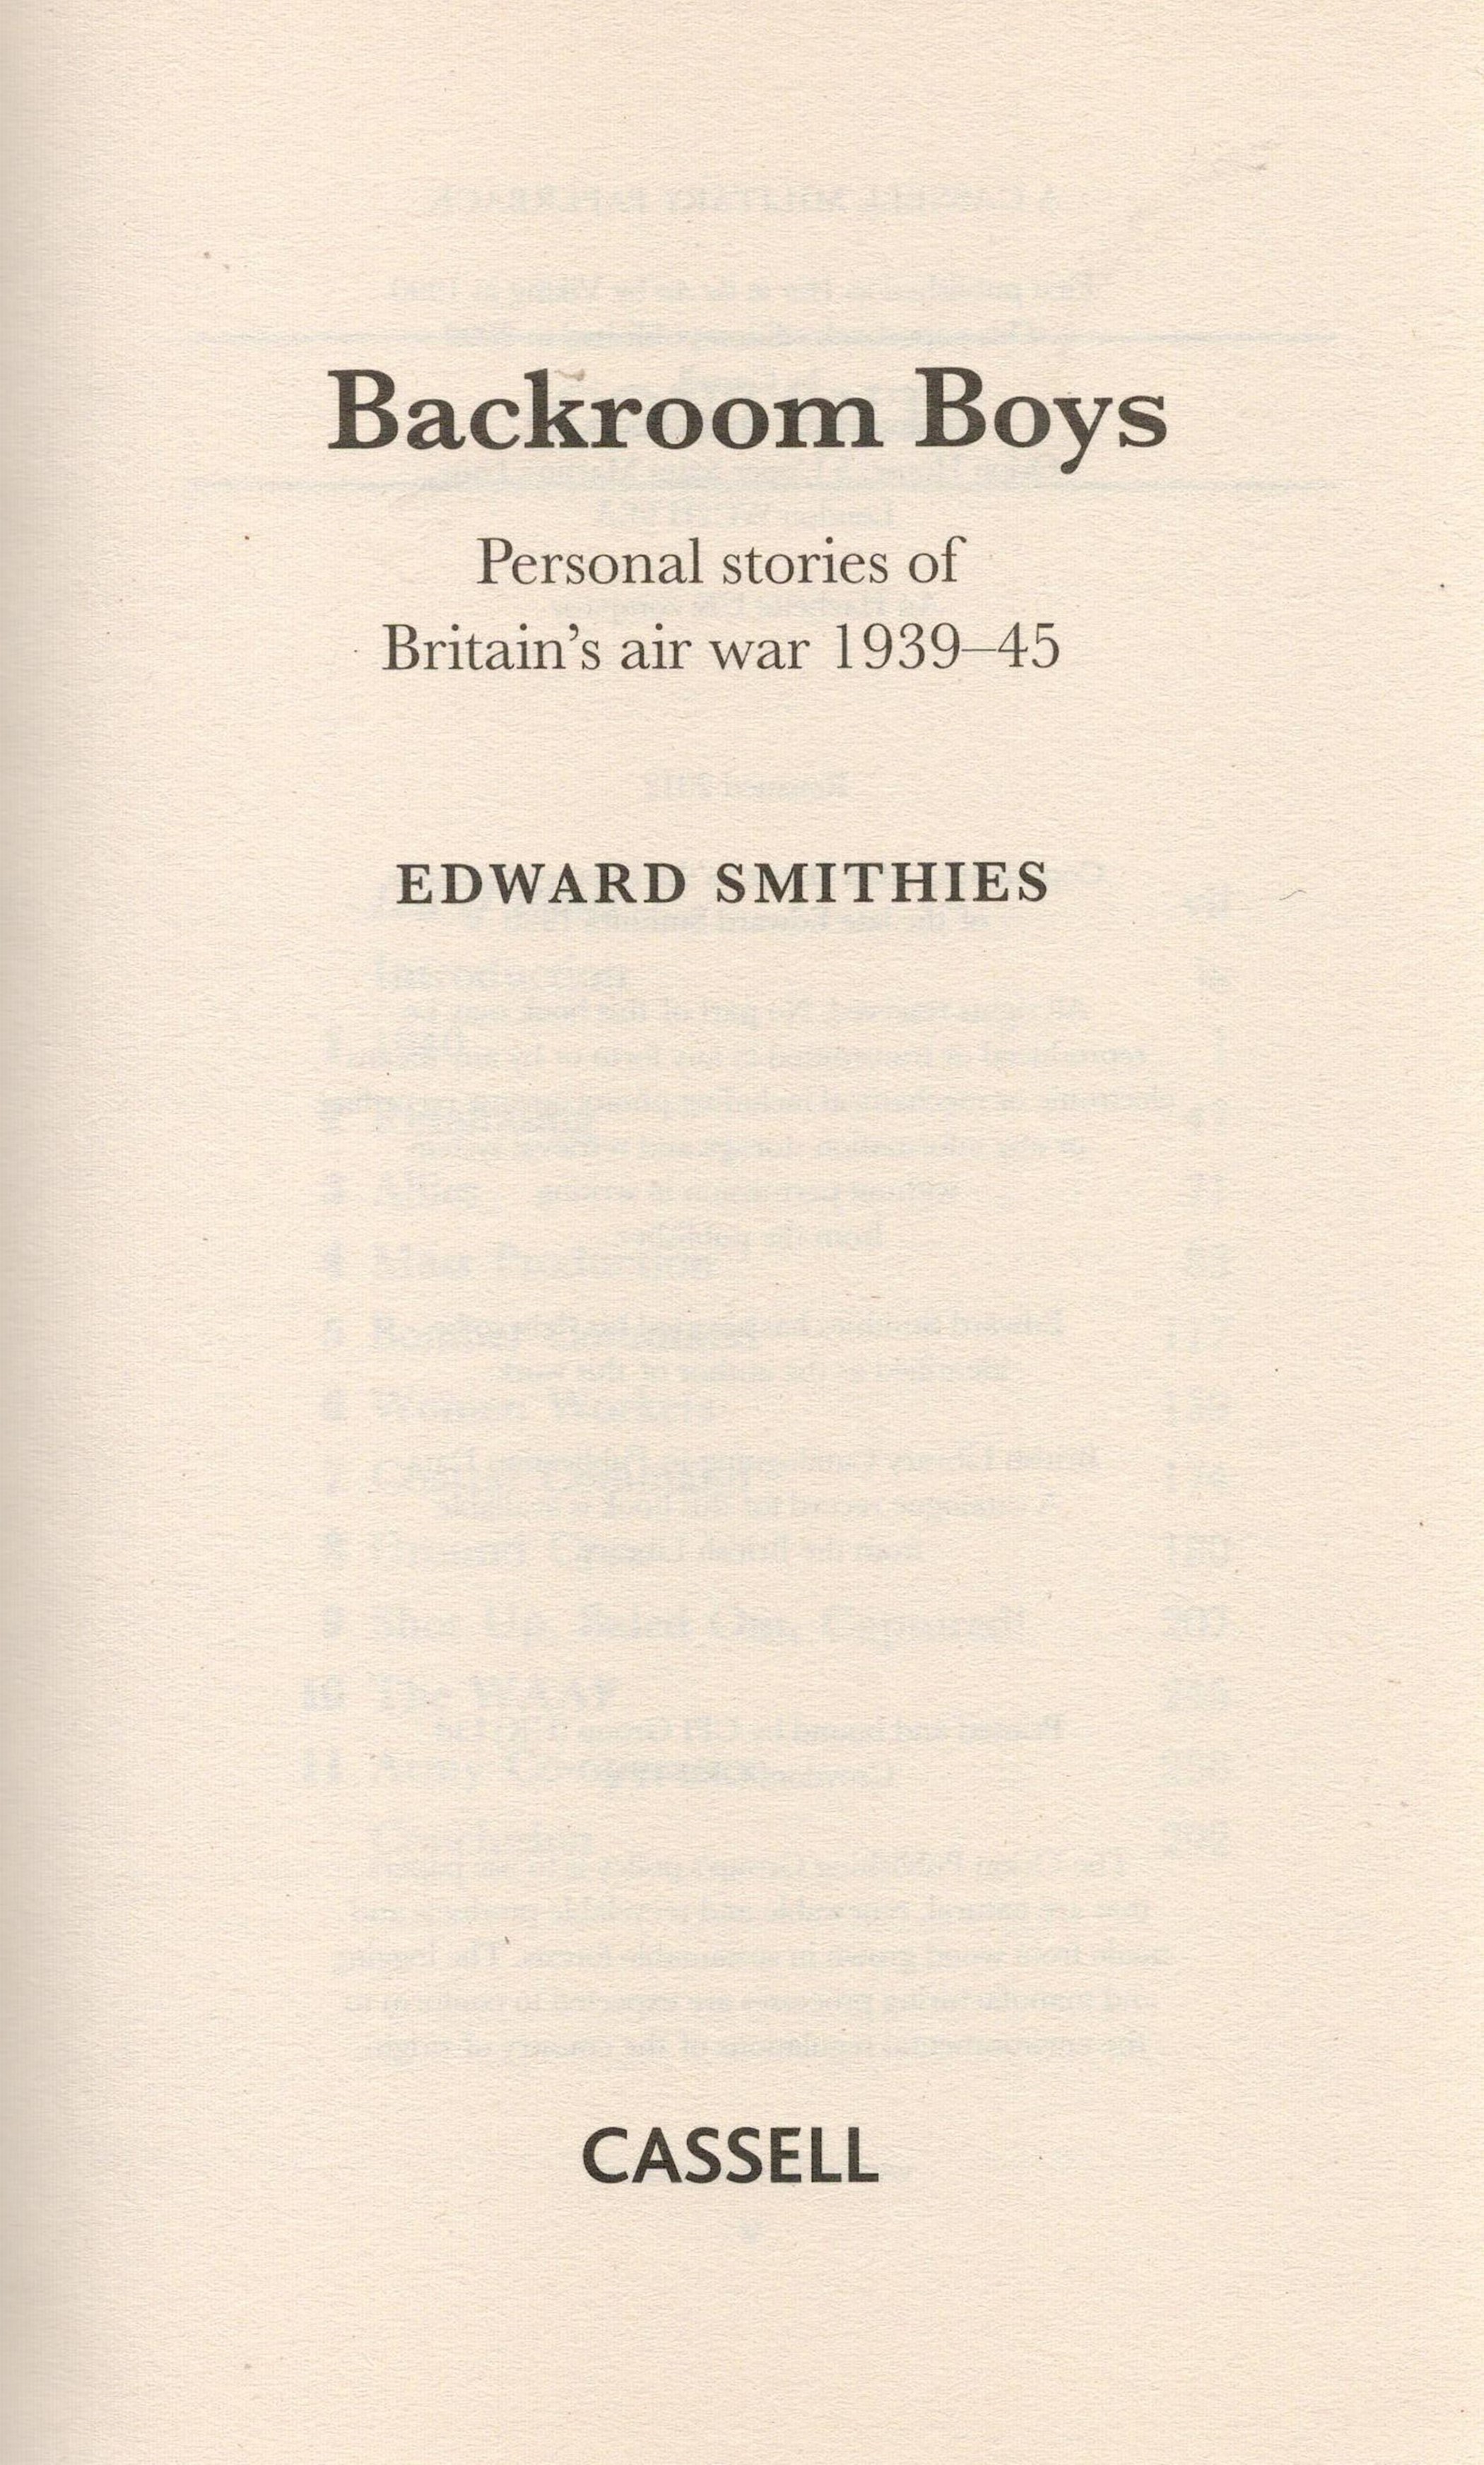 Backroom Boys Personal Stories of Britain's Air War by Edward Smithies Softback Book reissued 2012 - Image 4 of 9